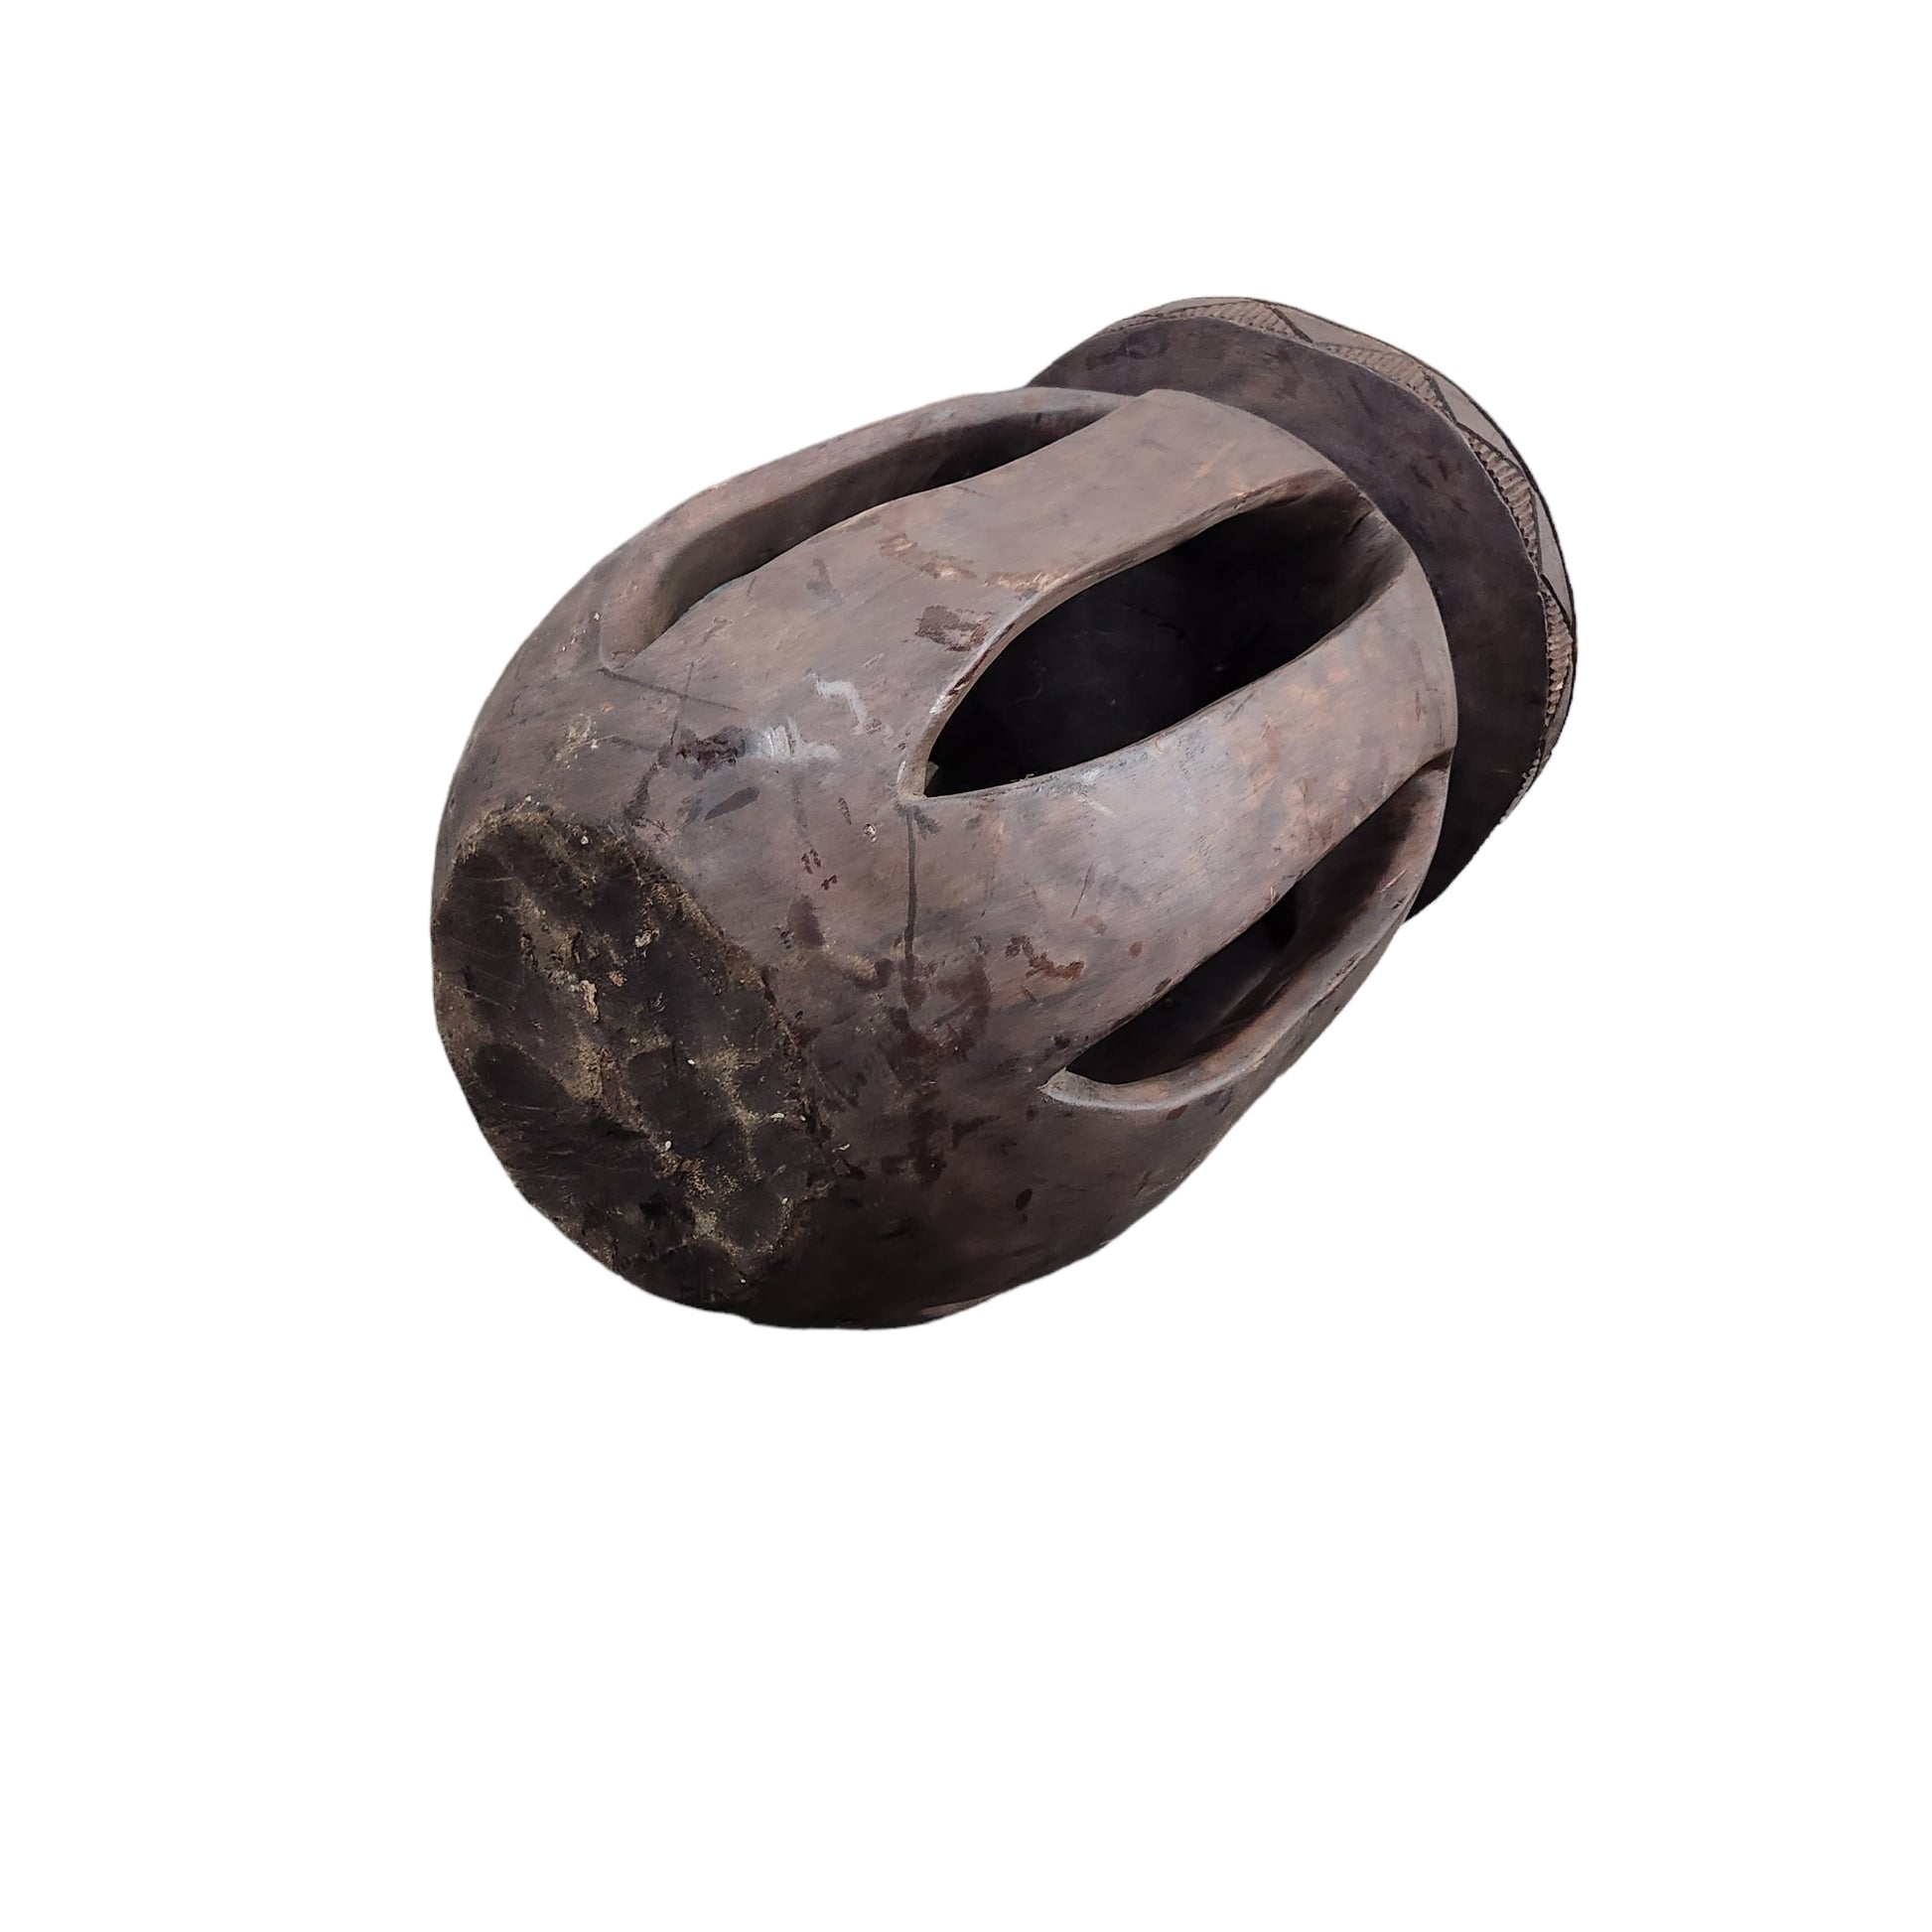 Baga Stool from Guinea (19th Century) - MD African Art